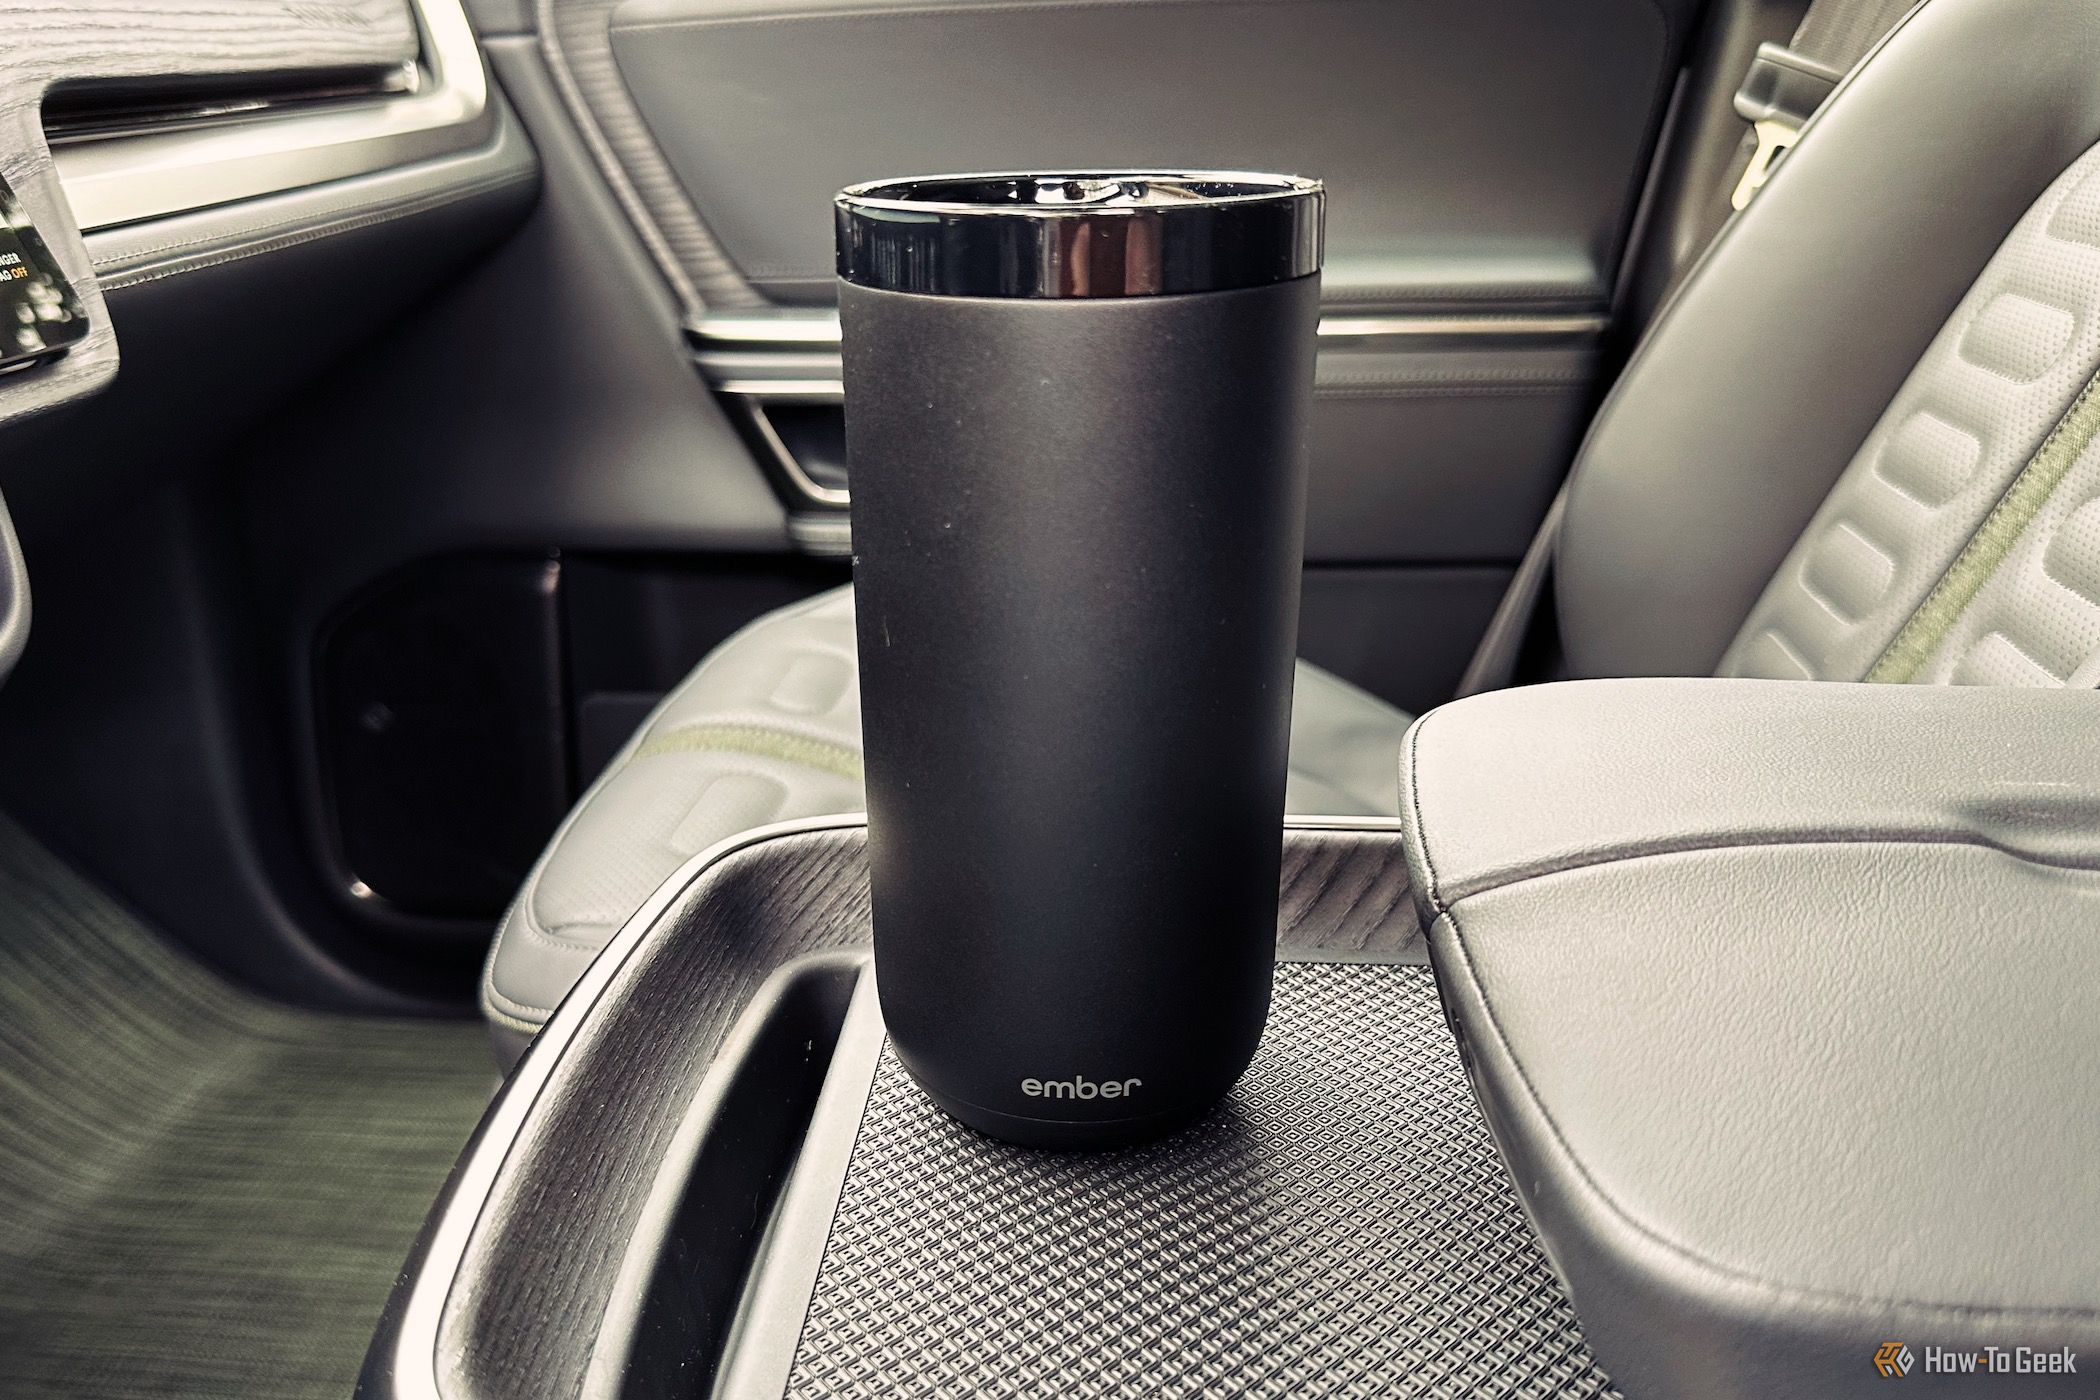 Ember Tumbler Review: A Perfectly Smart Coffee Cup